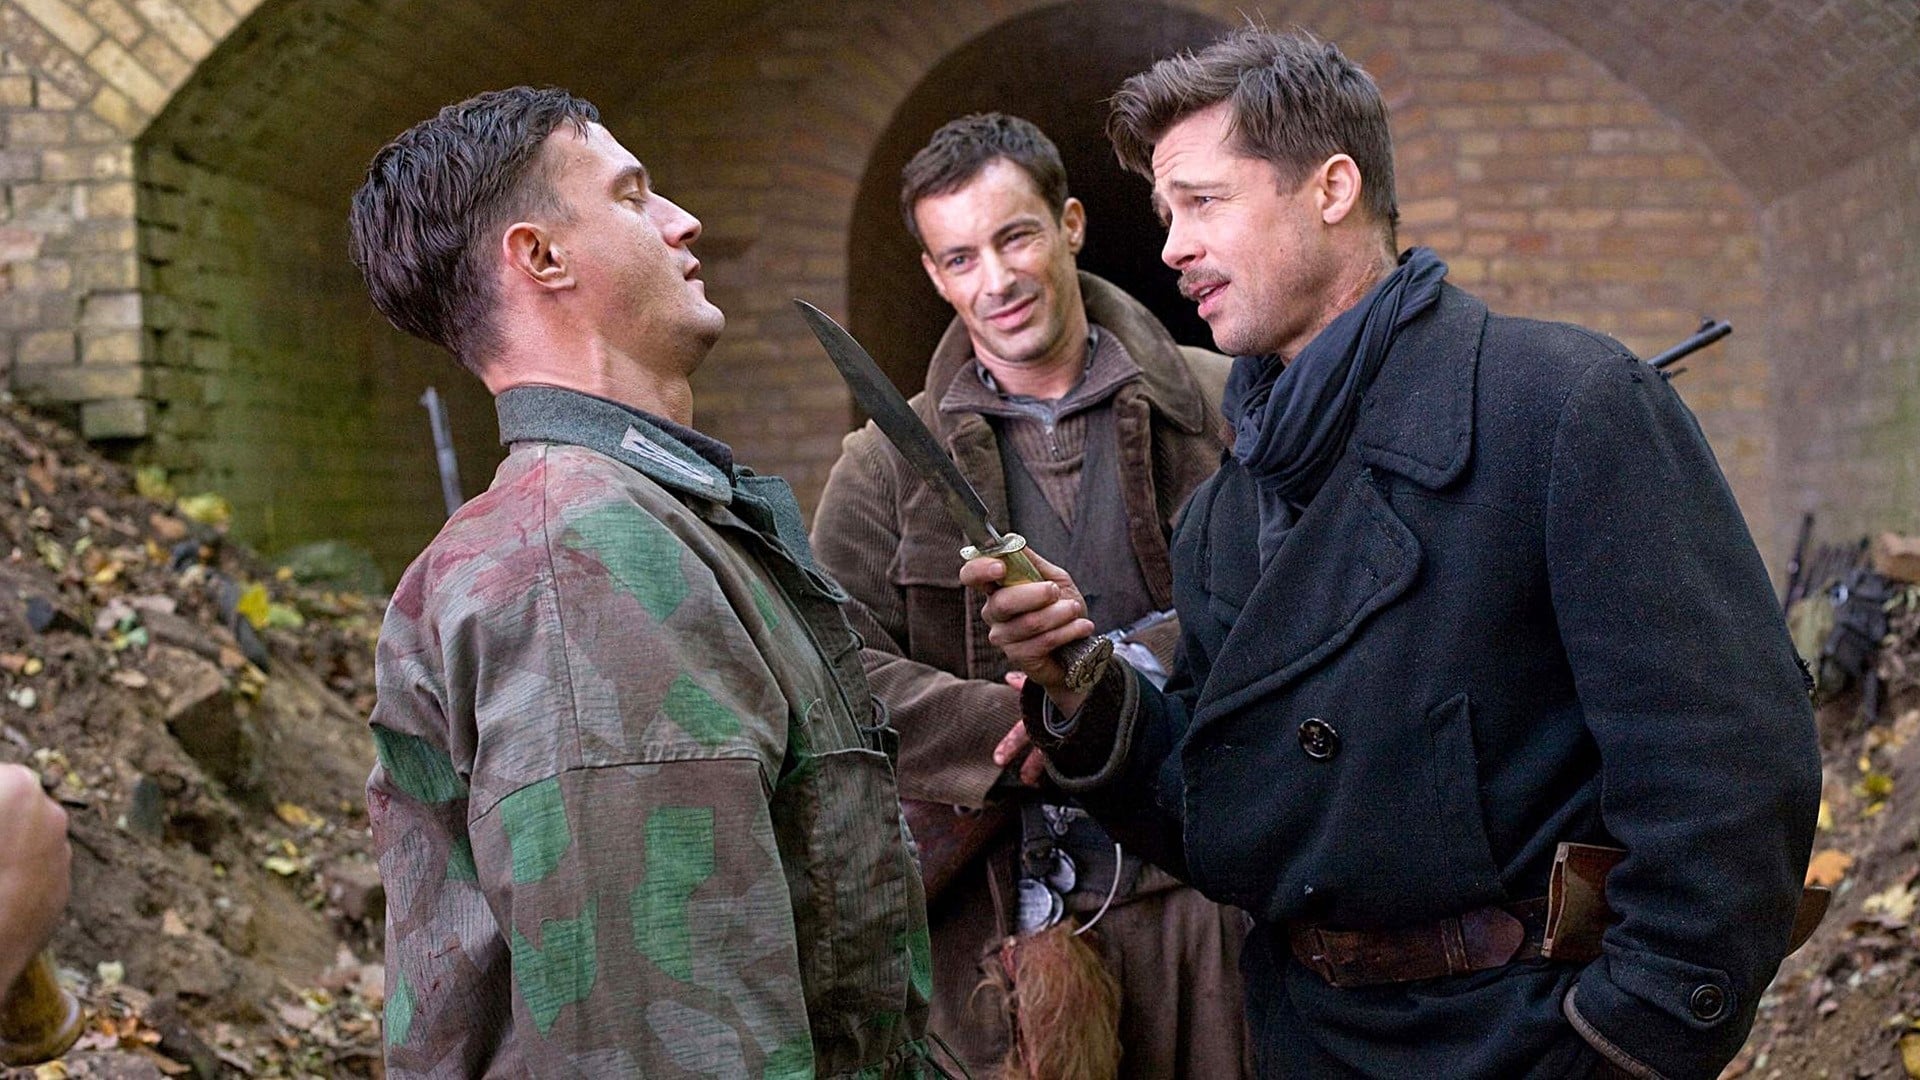 Inglourious Basterds Vern S Reviews On The Films Of Cinema